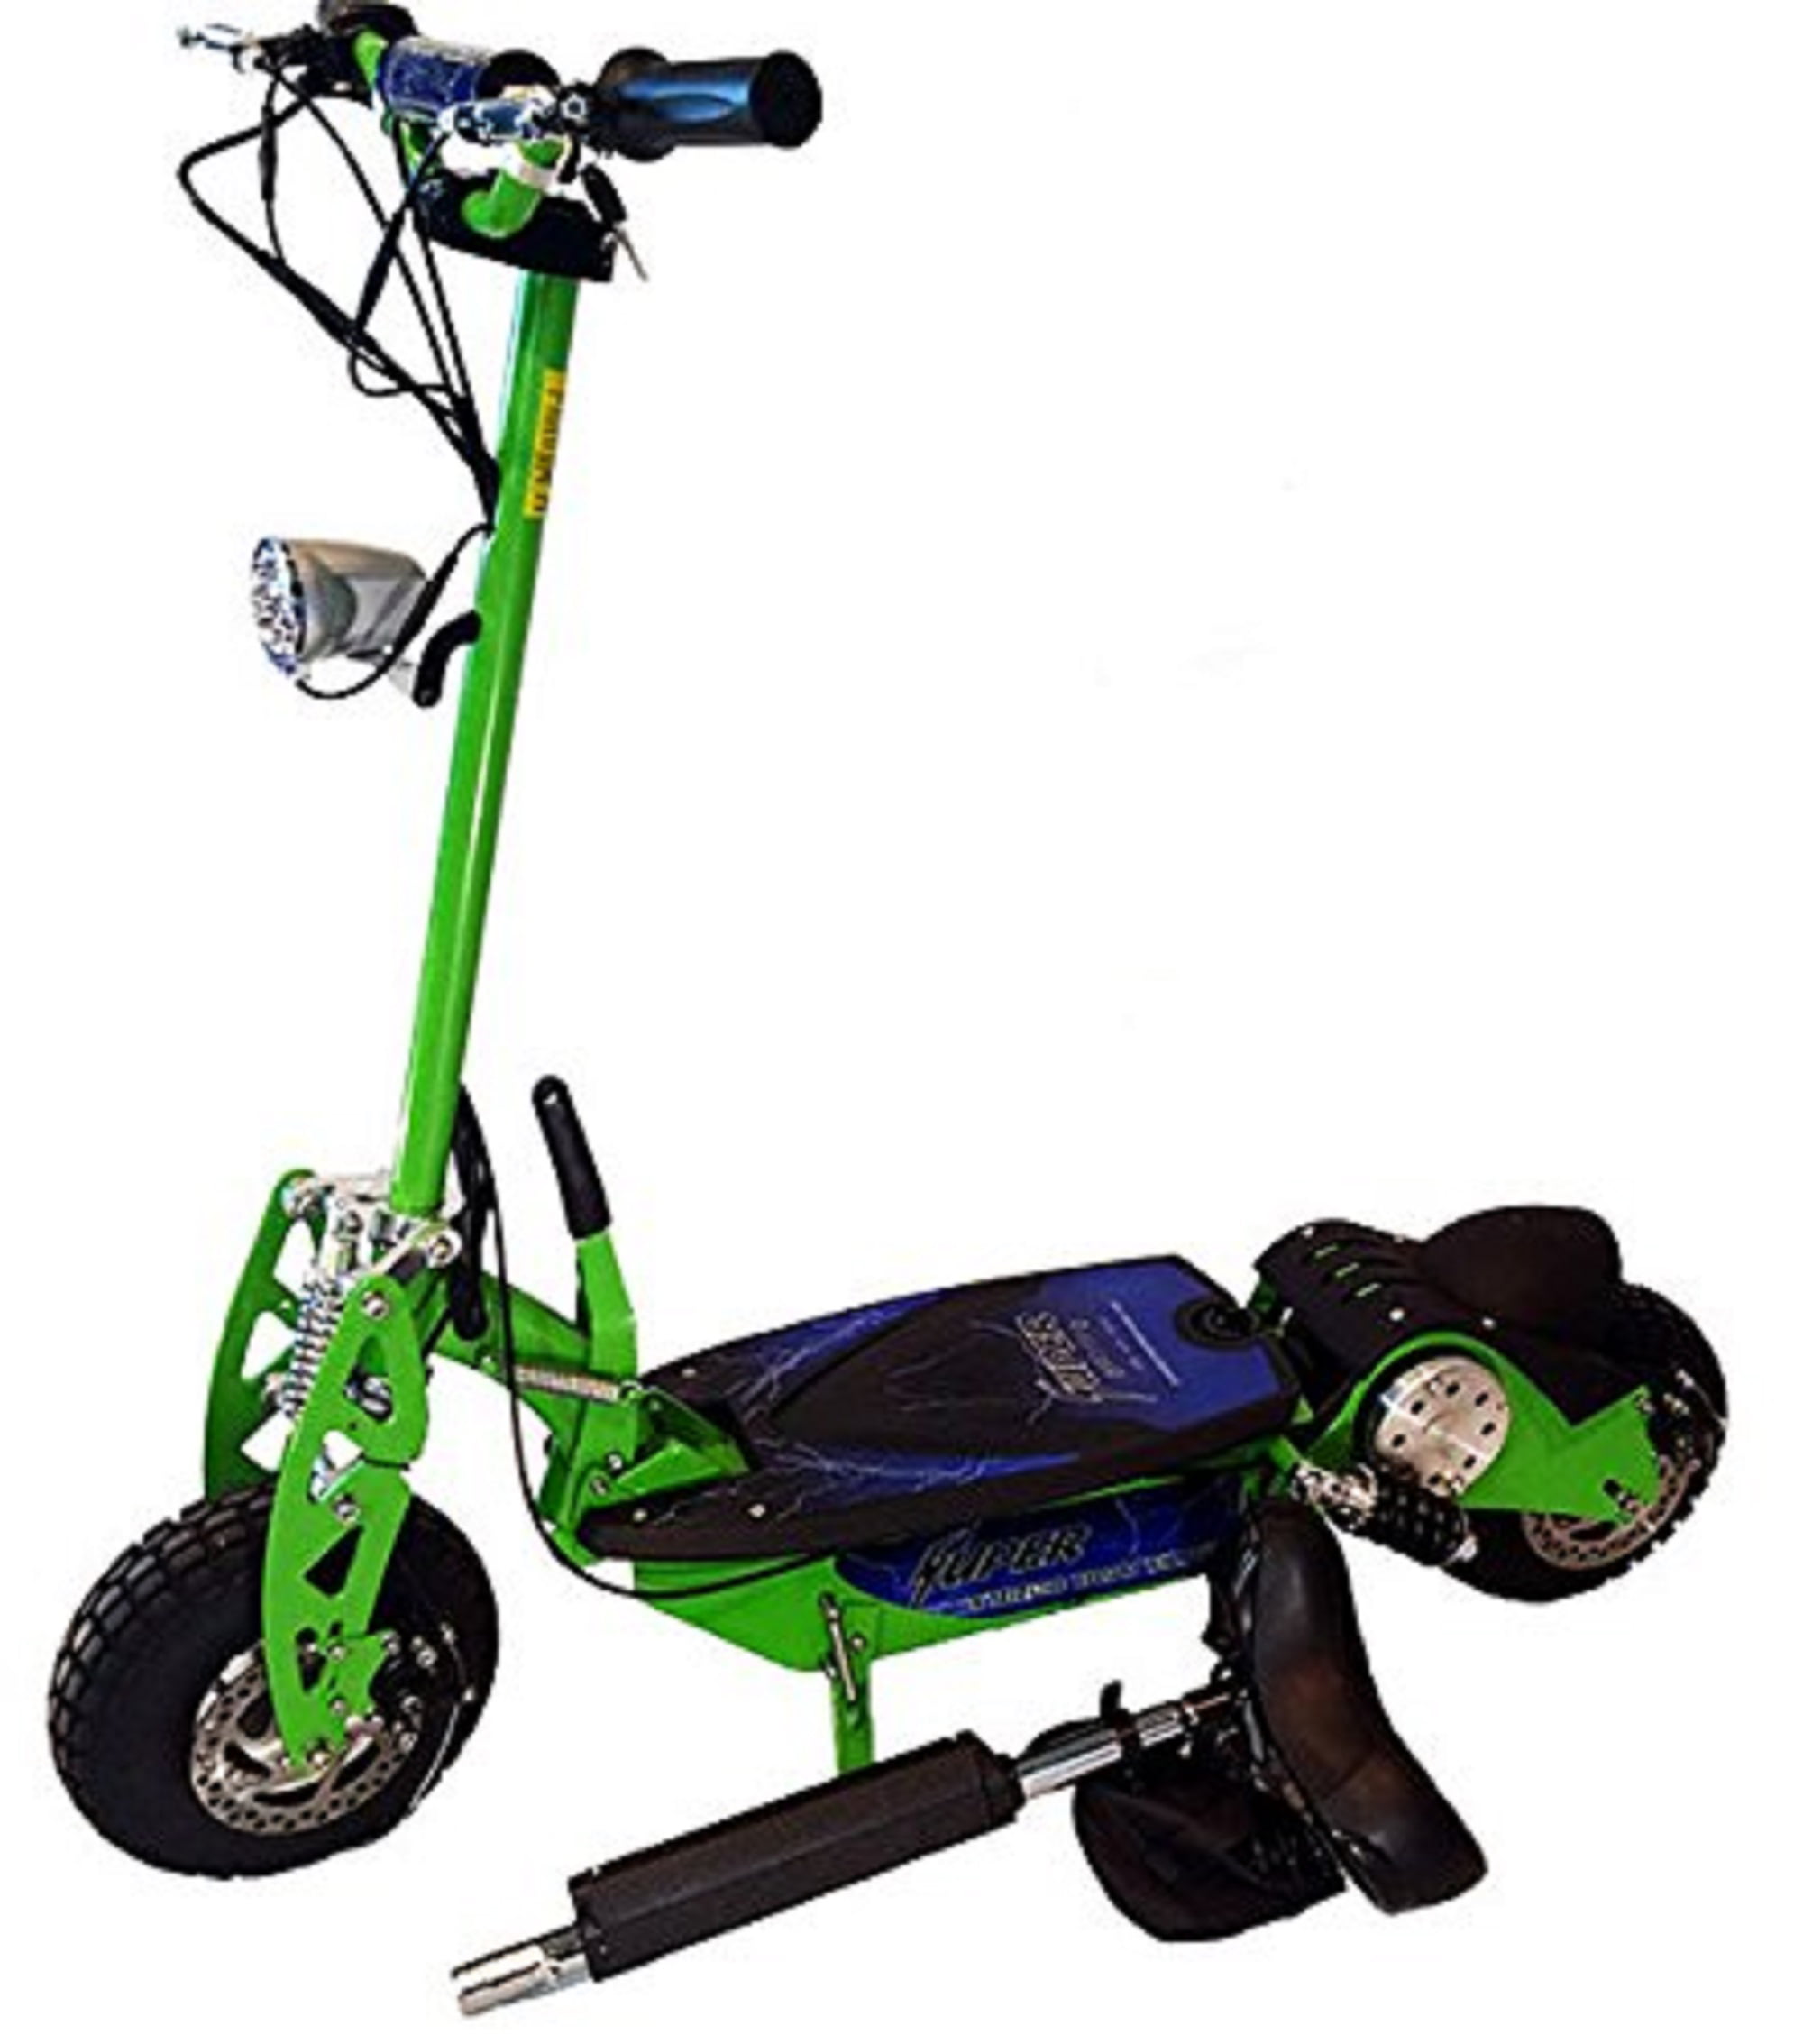 Super Cycles & Scooters - Super Turbo 1000-Elite - Electric Scooter - 2-Wheel - Neon Green - Walmart.com